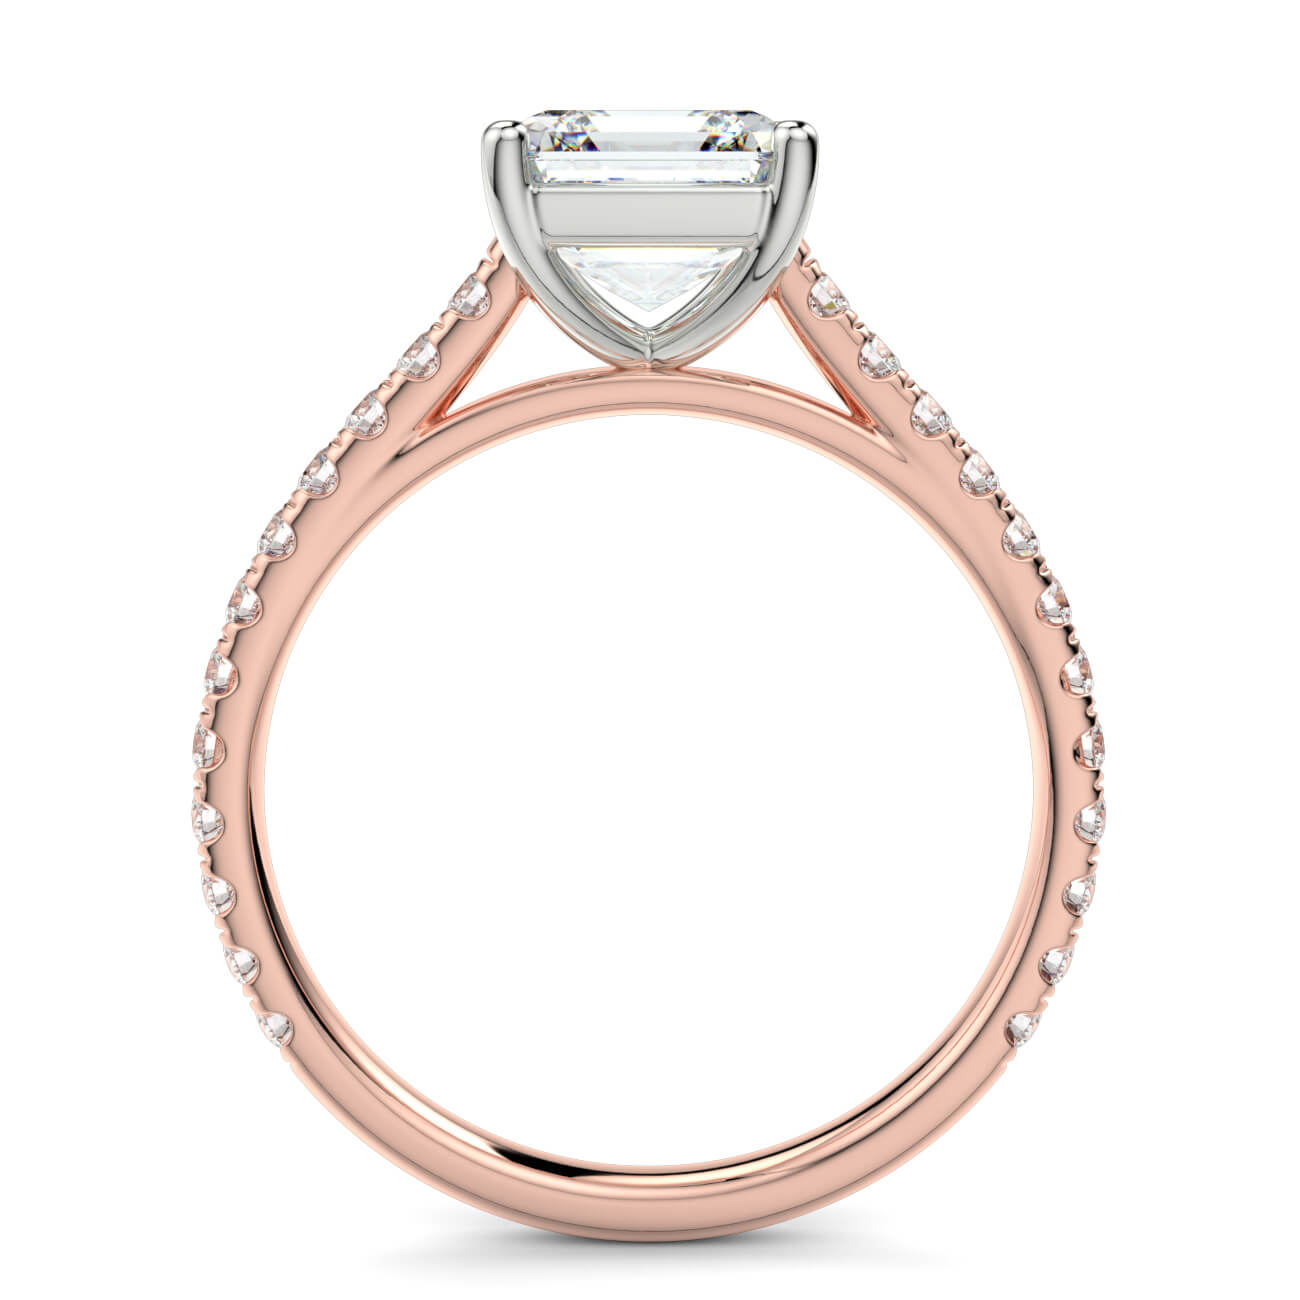 Asscher Cut diamond cathedral engagement ring in rose gold and white gold – Australian Diamond Network